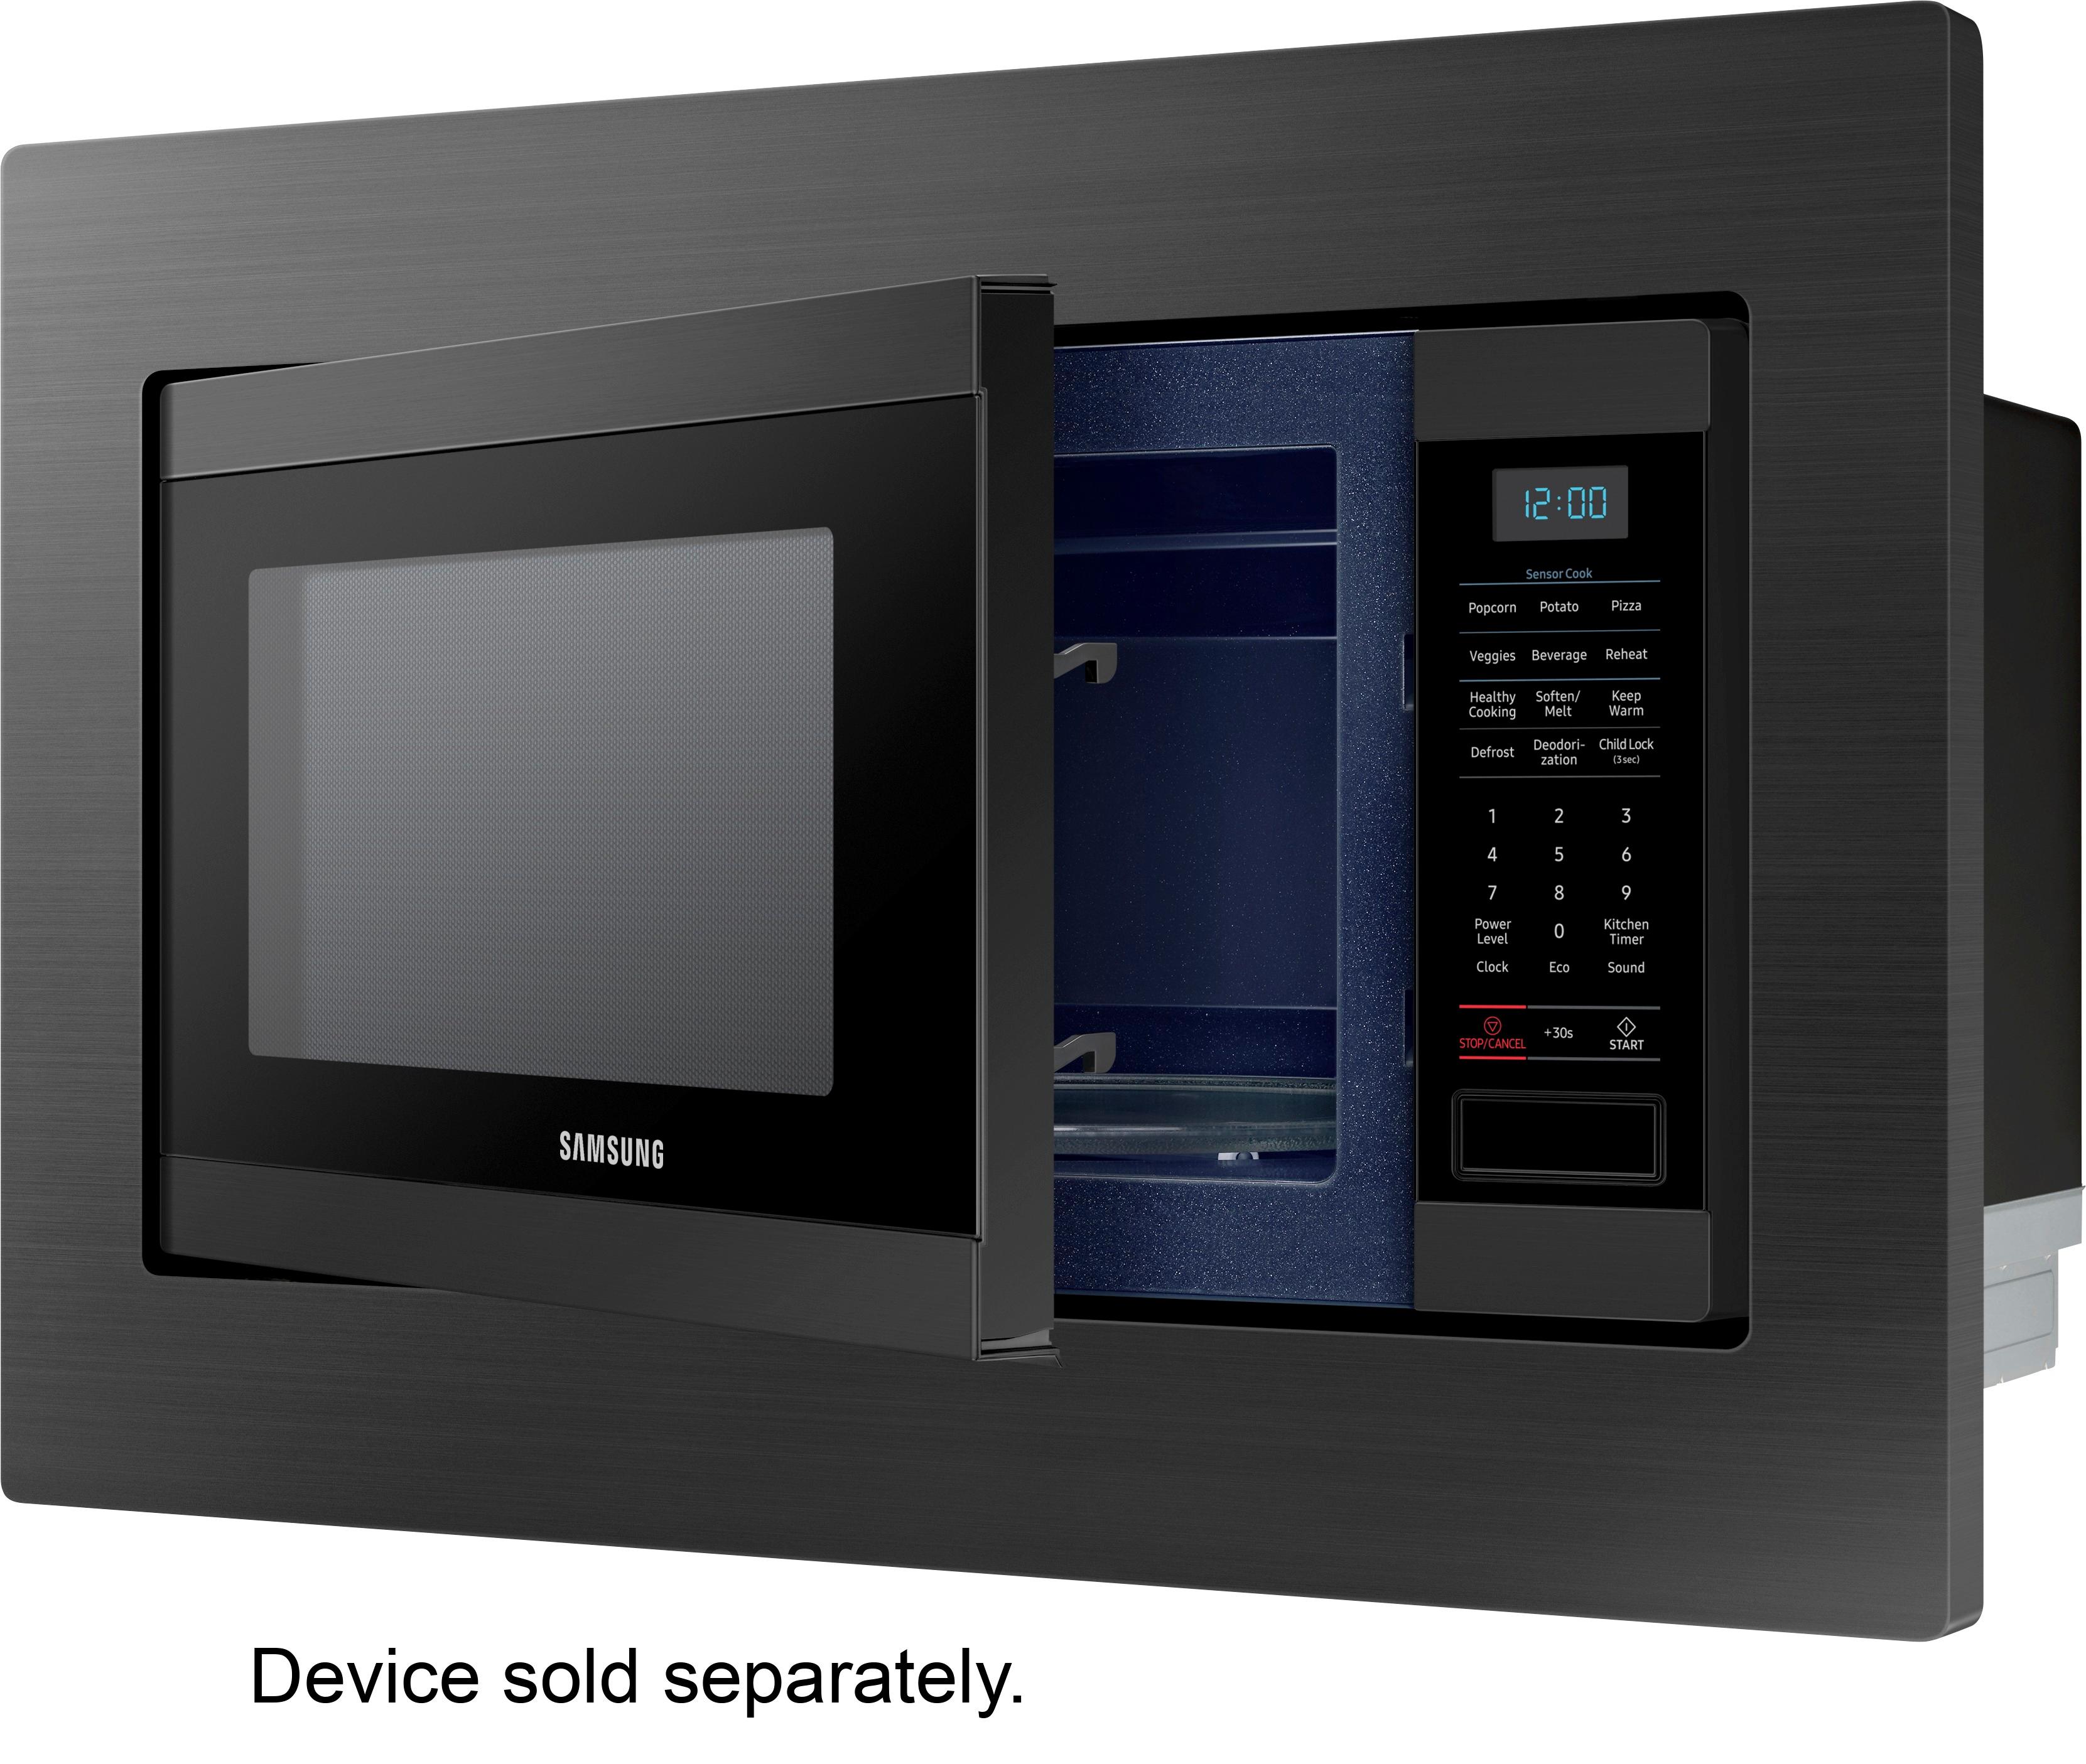 Left View: Samsung - 1.9 Cu. Ft. Countertop Microwave for Built-In Applications with Sensor Cook - Black stainless steel